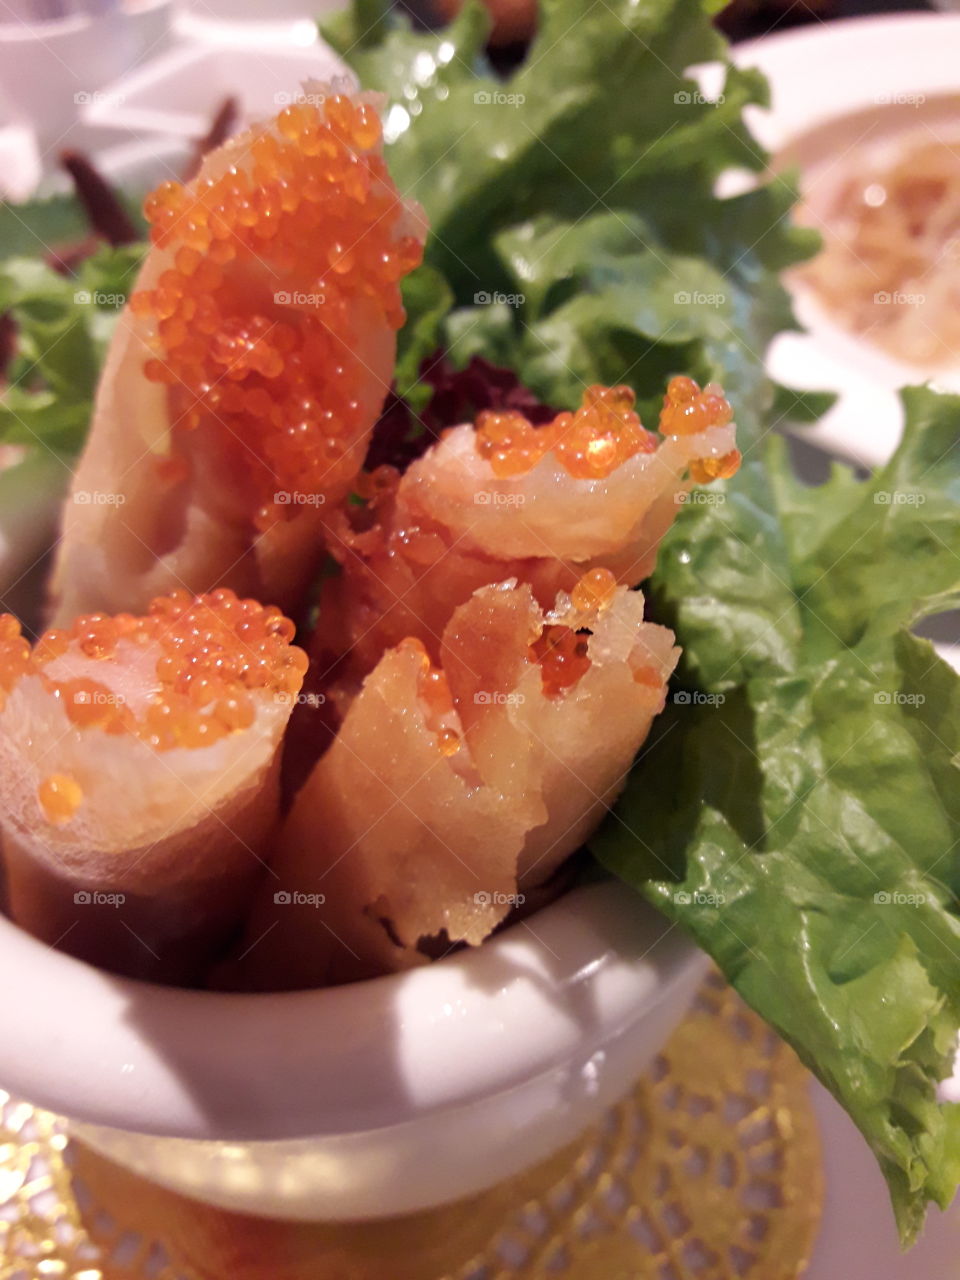 spring roll with fish eggs